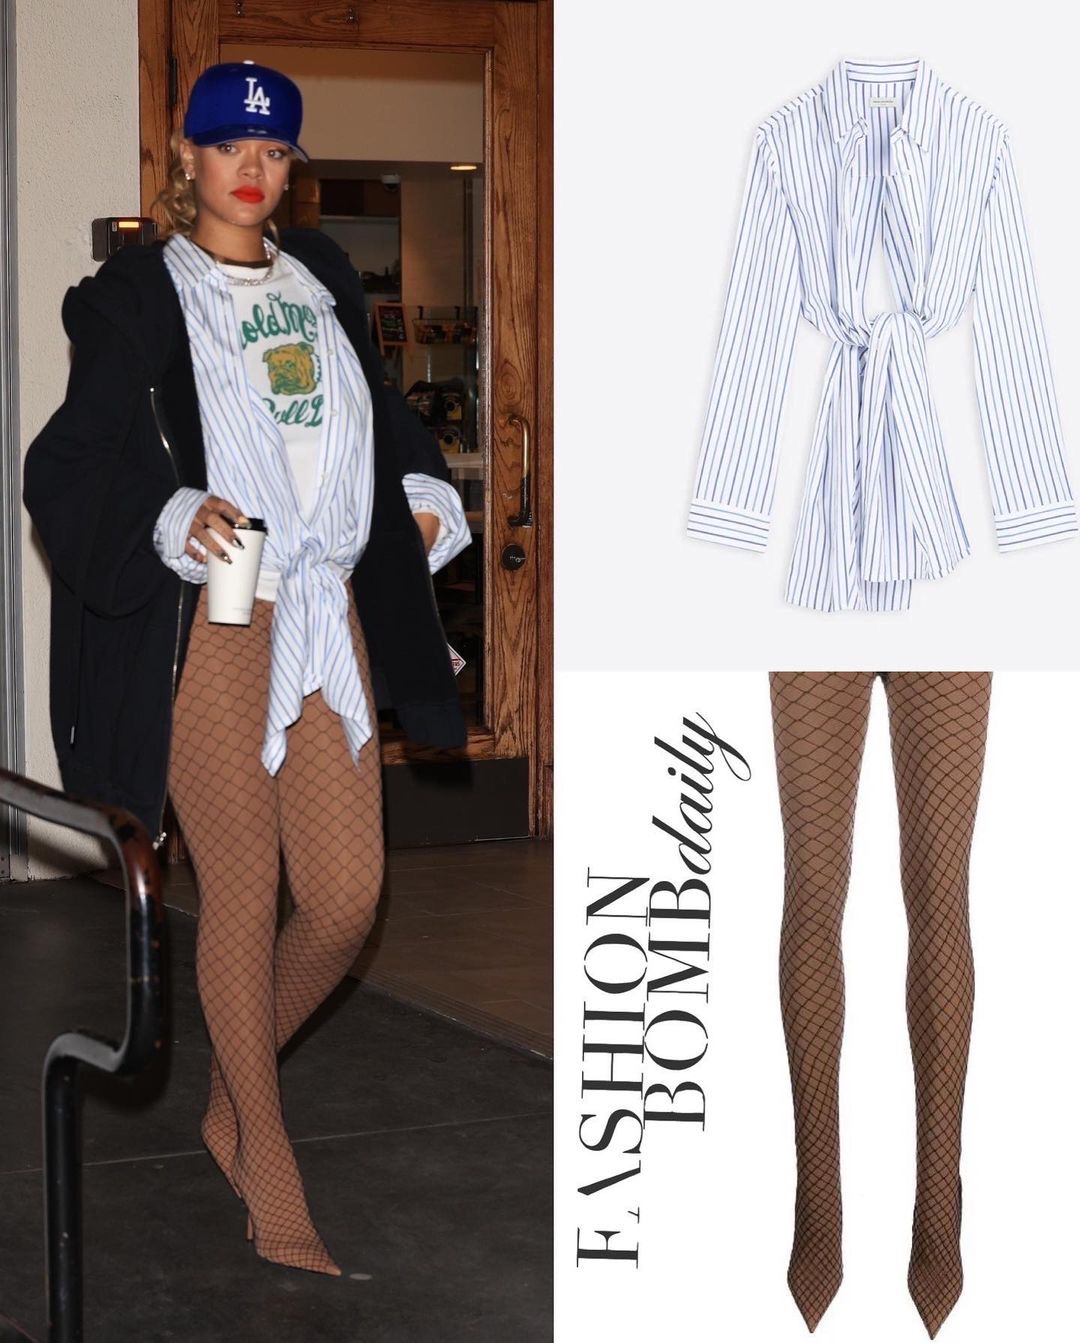 Rihanna Stepped Out to Dinner in a Black 650 R13 Hoodie a 575 Striped Dries Van Noten Shirt and Brown 4050 Balenciaga Fishnet Pantaleggings feat